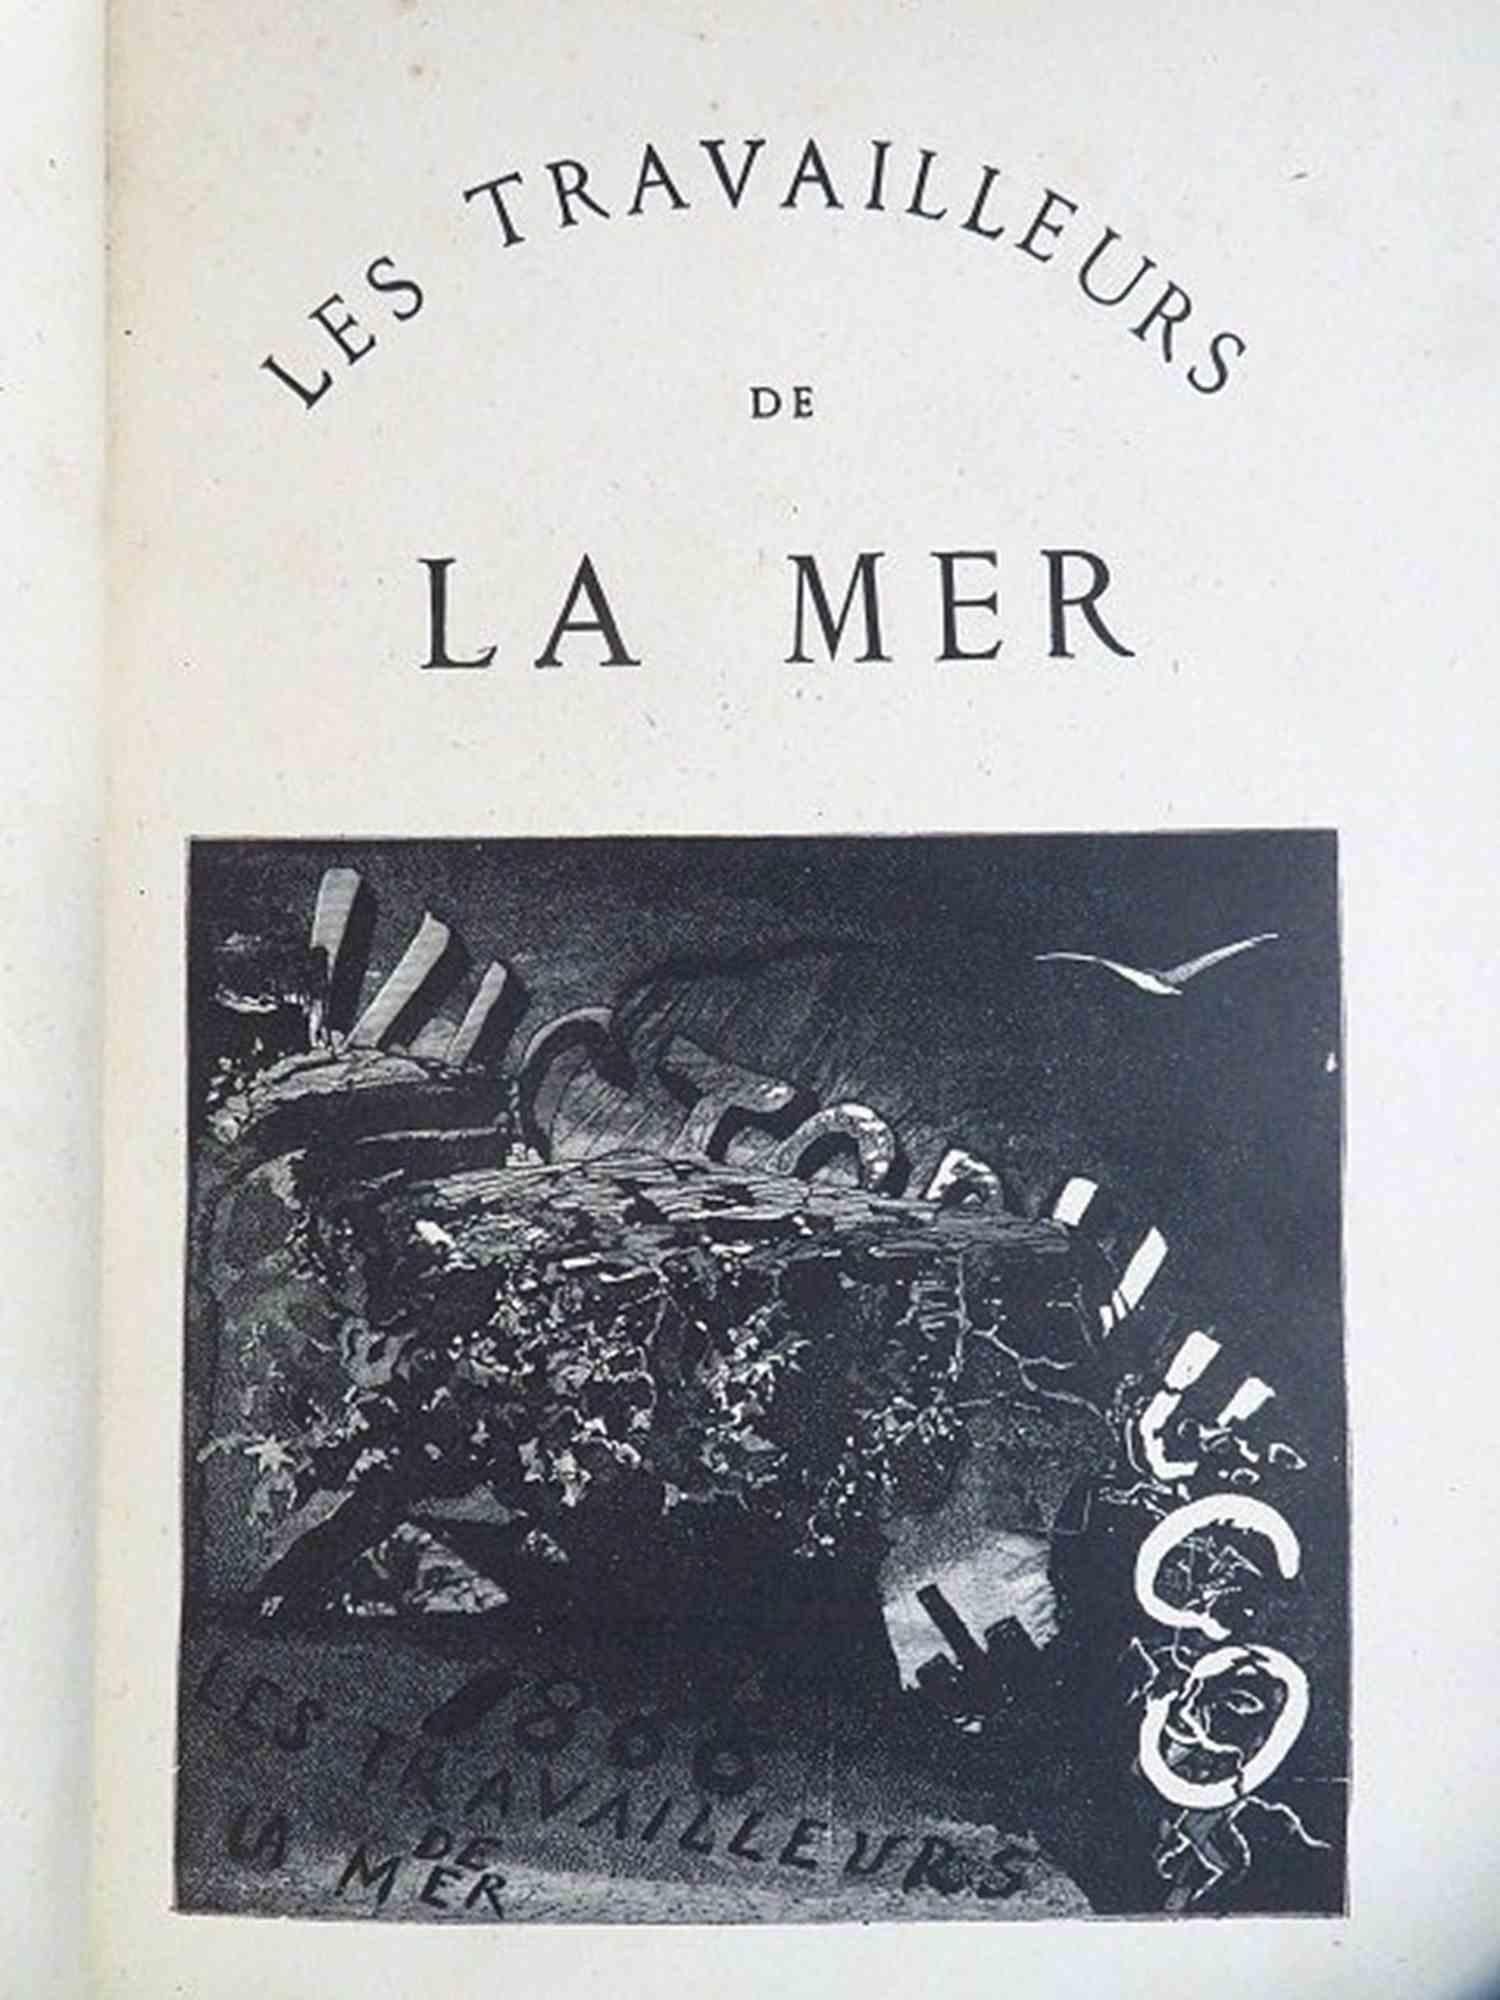 Les Travailleurs de la Mer is a rare book by Victor Hugo published in 1866.

Edited by Quantin - Paris. 

Original “De luxe”  illustrated edition. “Tirage de tête” of 50 numbered copies on “velin teinté” (this is n°32) in a half leather coeval